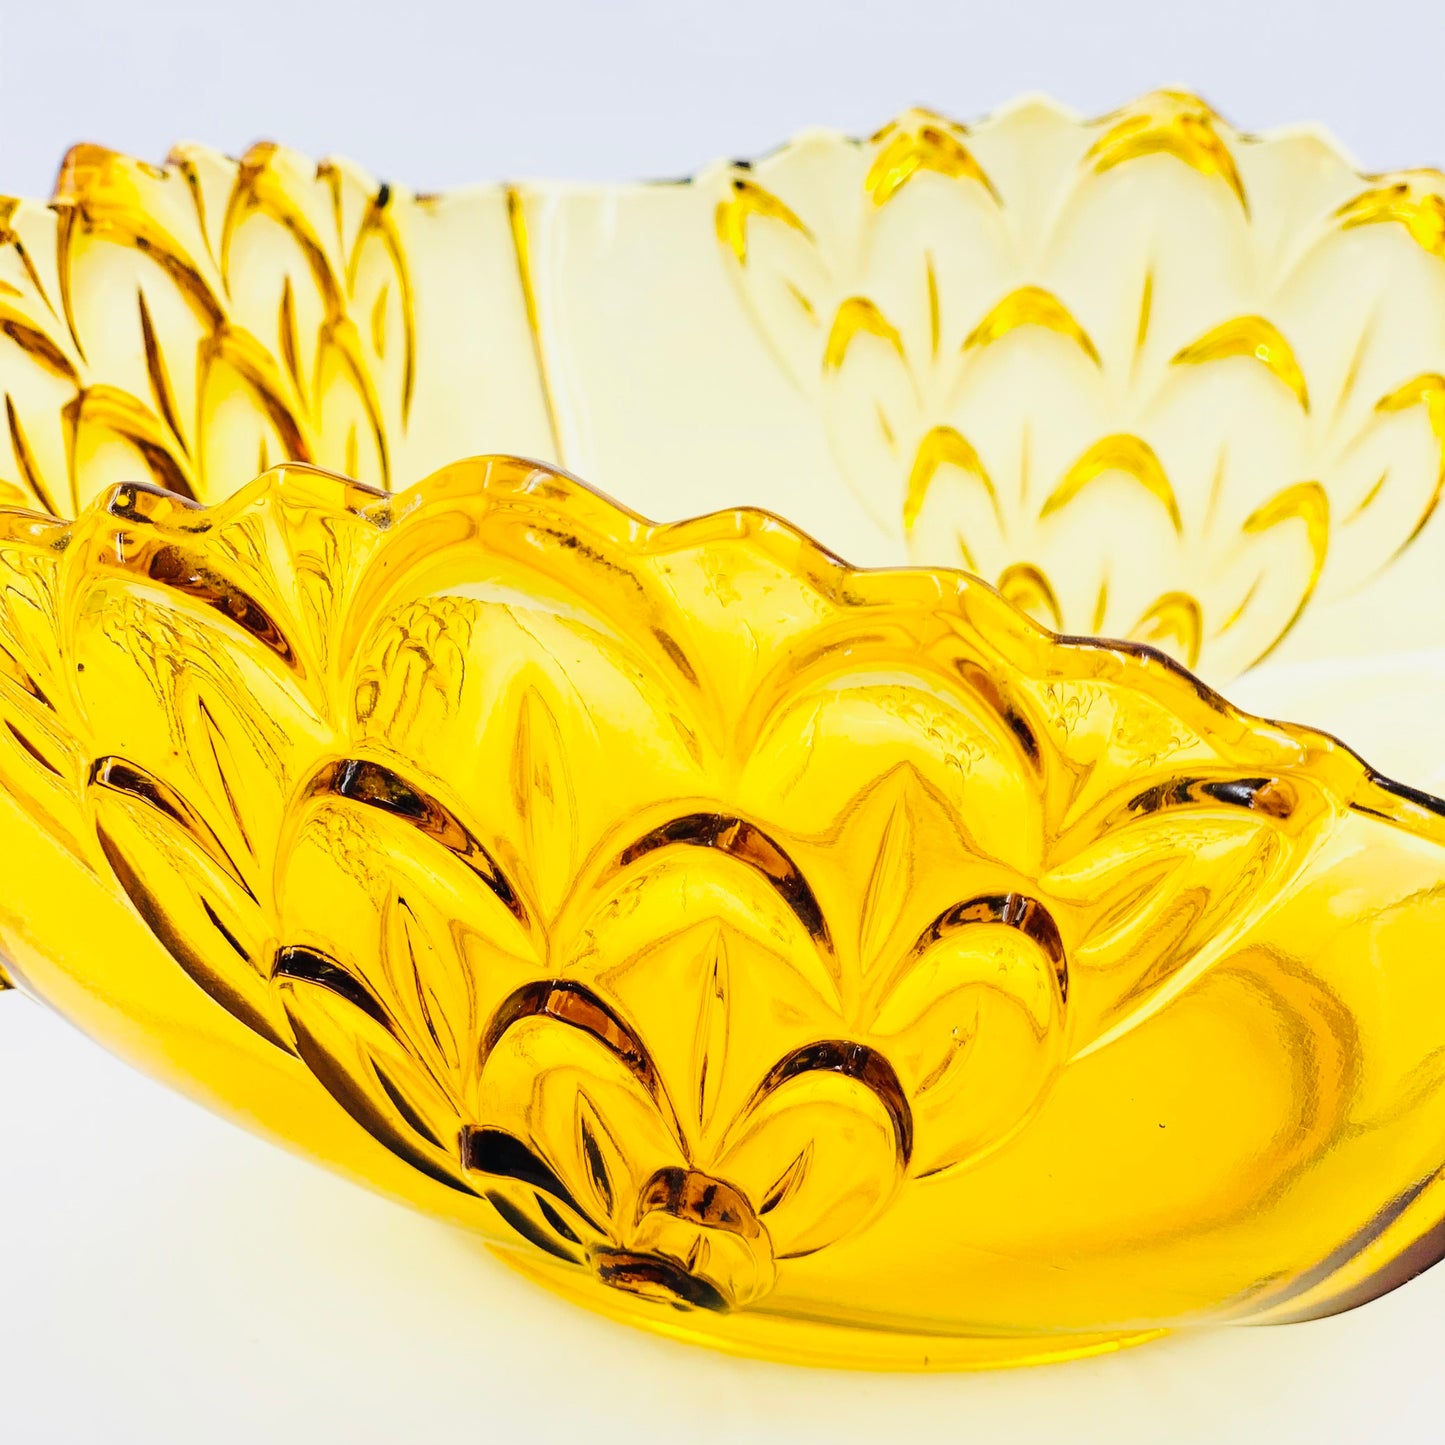 Art Deco Amber Glass Bowl in Fish Scale Pattern